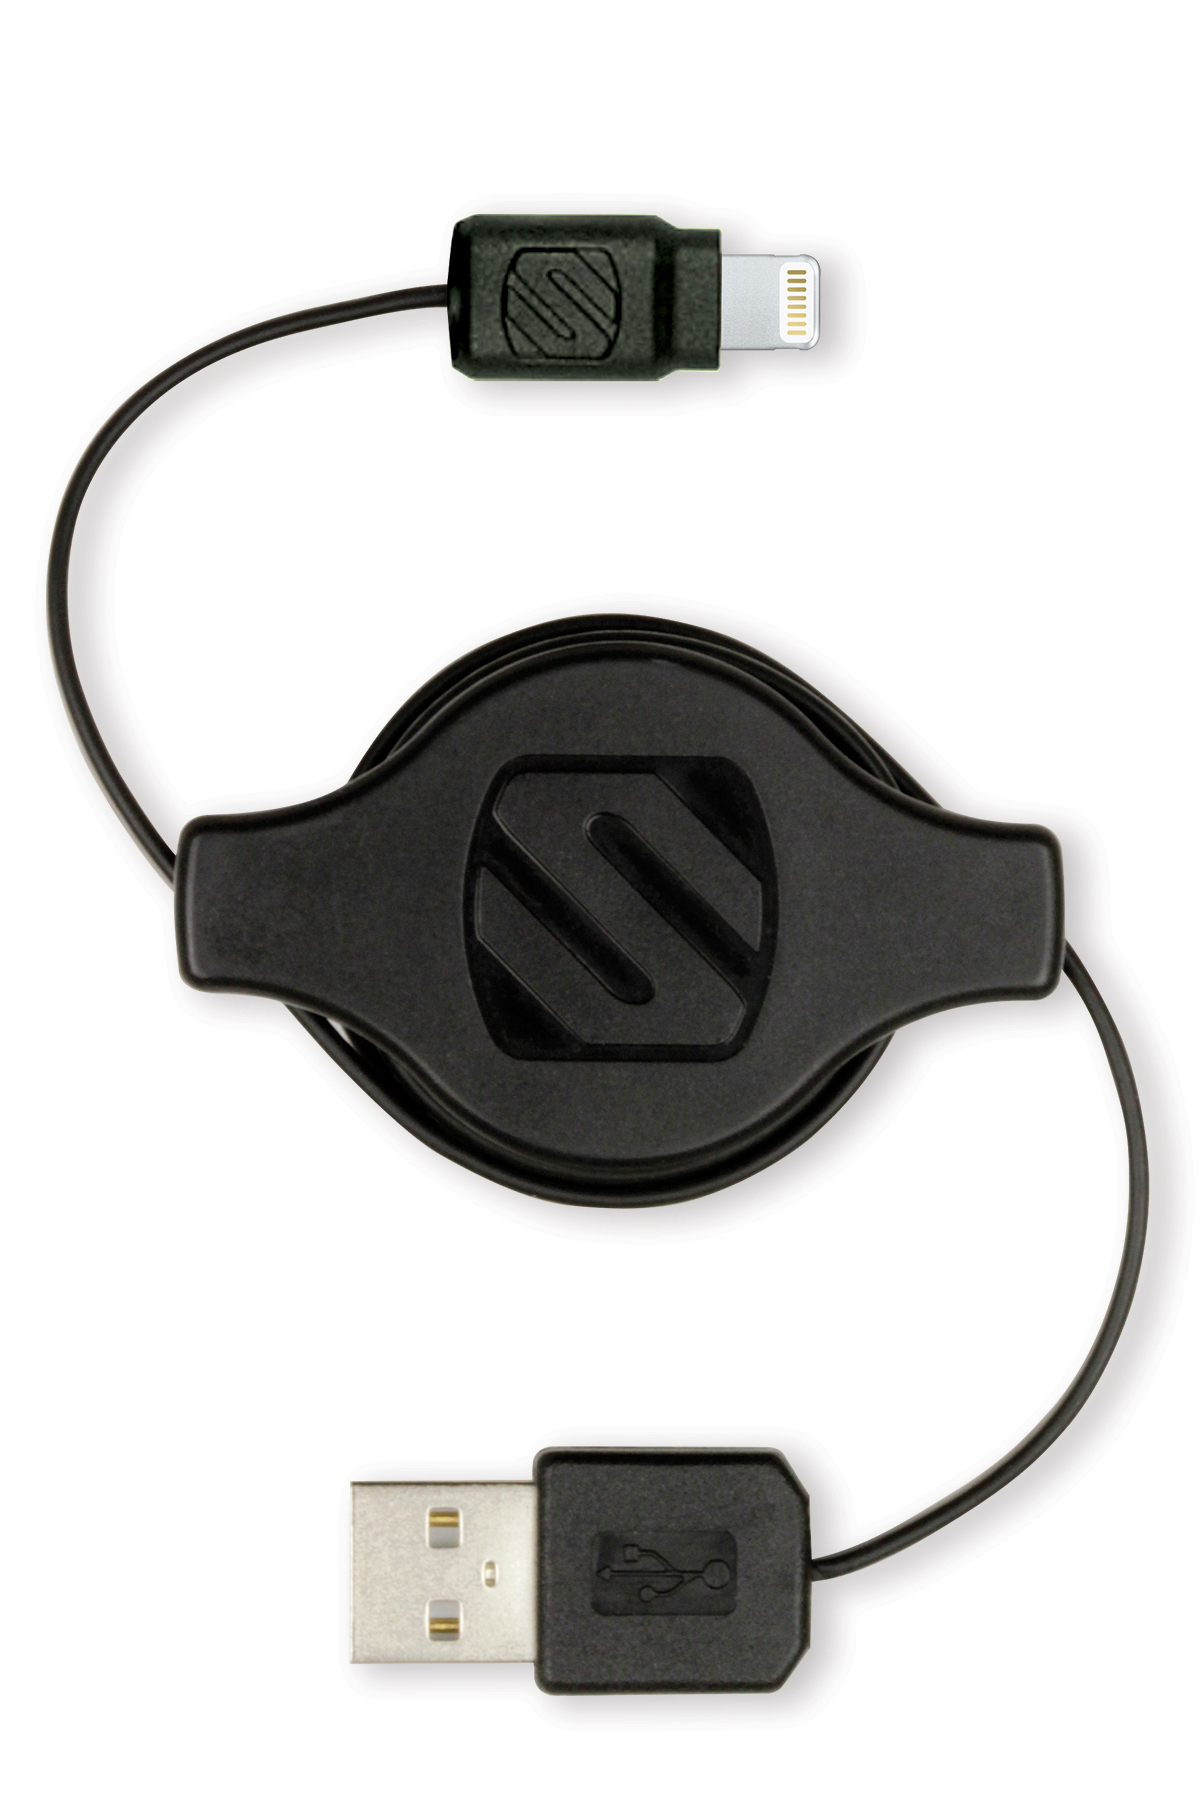 Scosche releases Lightning chargers and first retractable Lightning USB cable